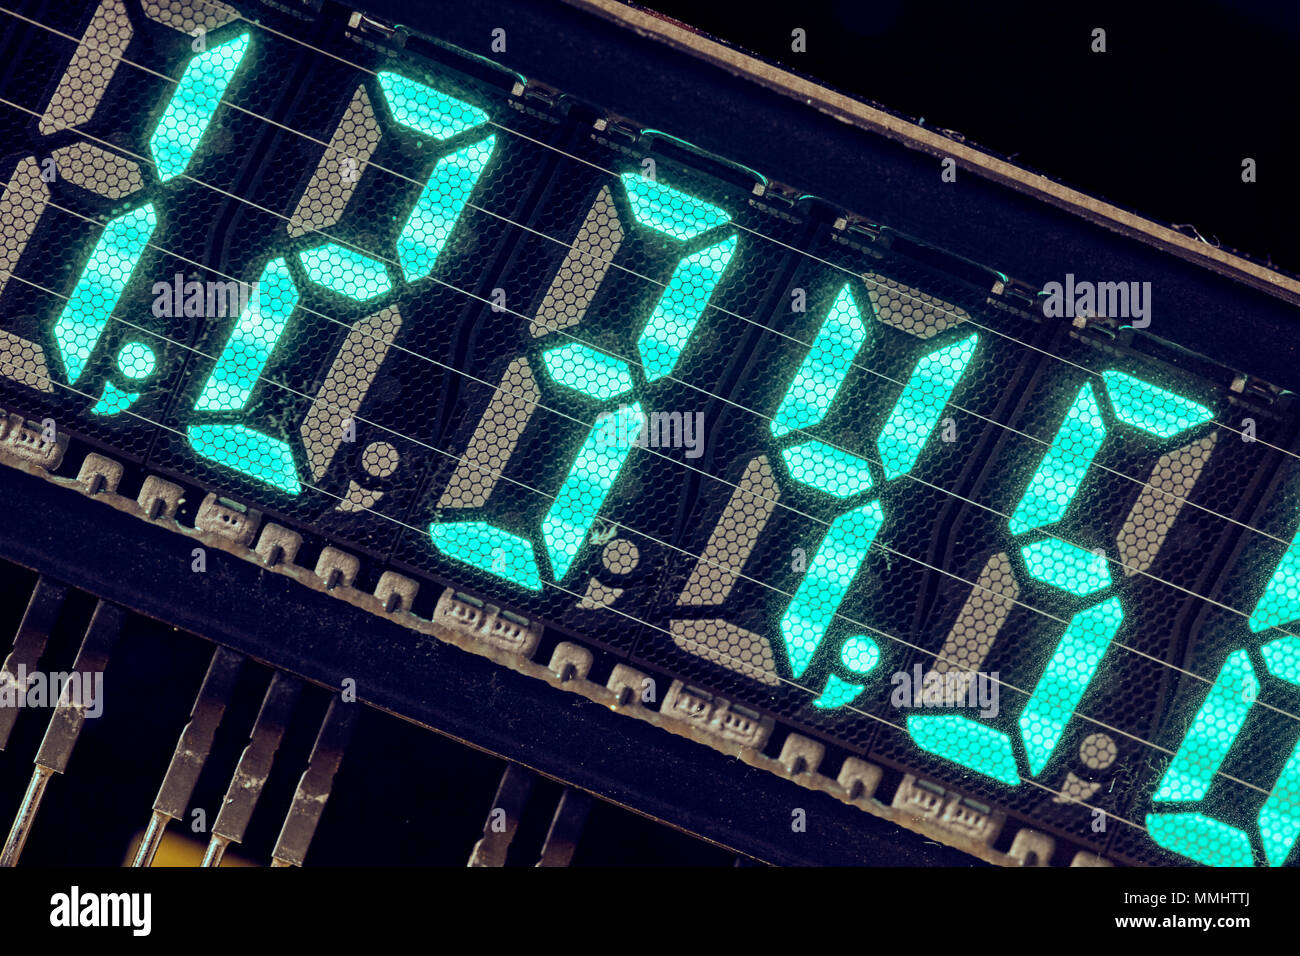 Close-up of a Vacuum Fluorescent Display Stock Photo